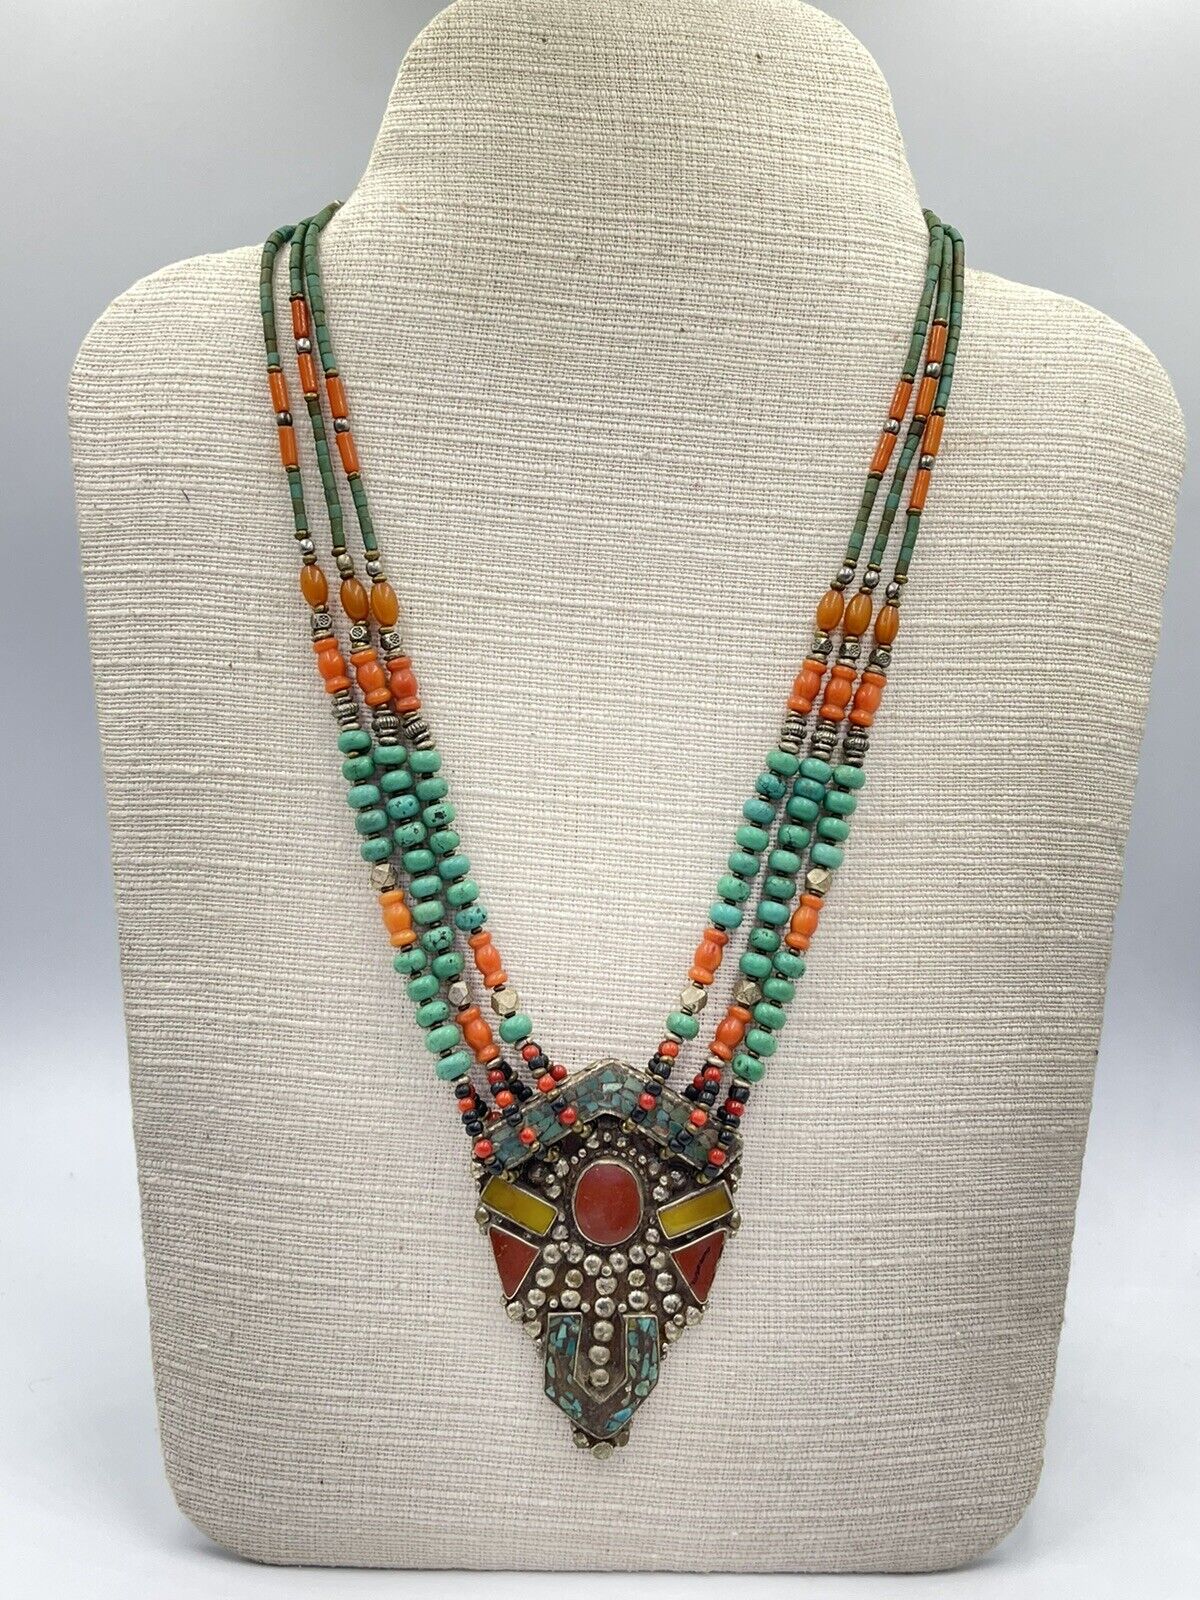 Amazing Handmade Tibetan Old Necklace With Natural Turquoise Coral & Amber Stone